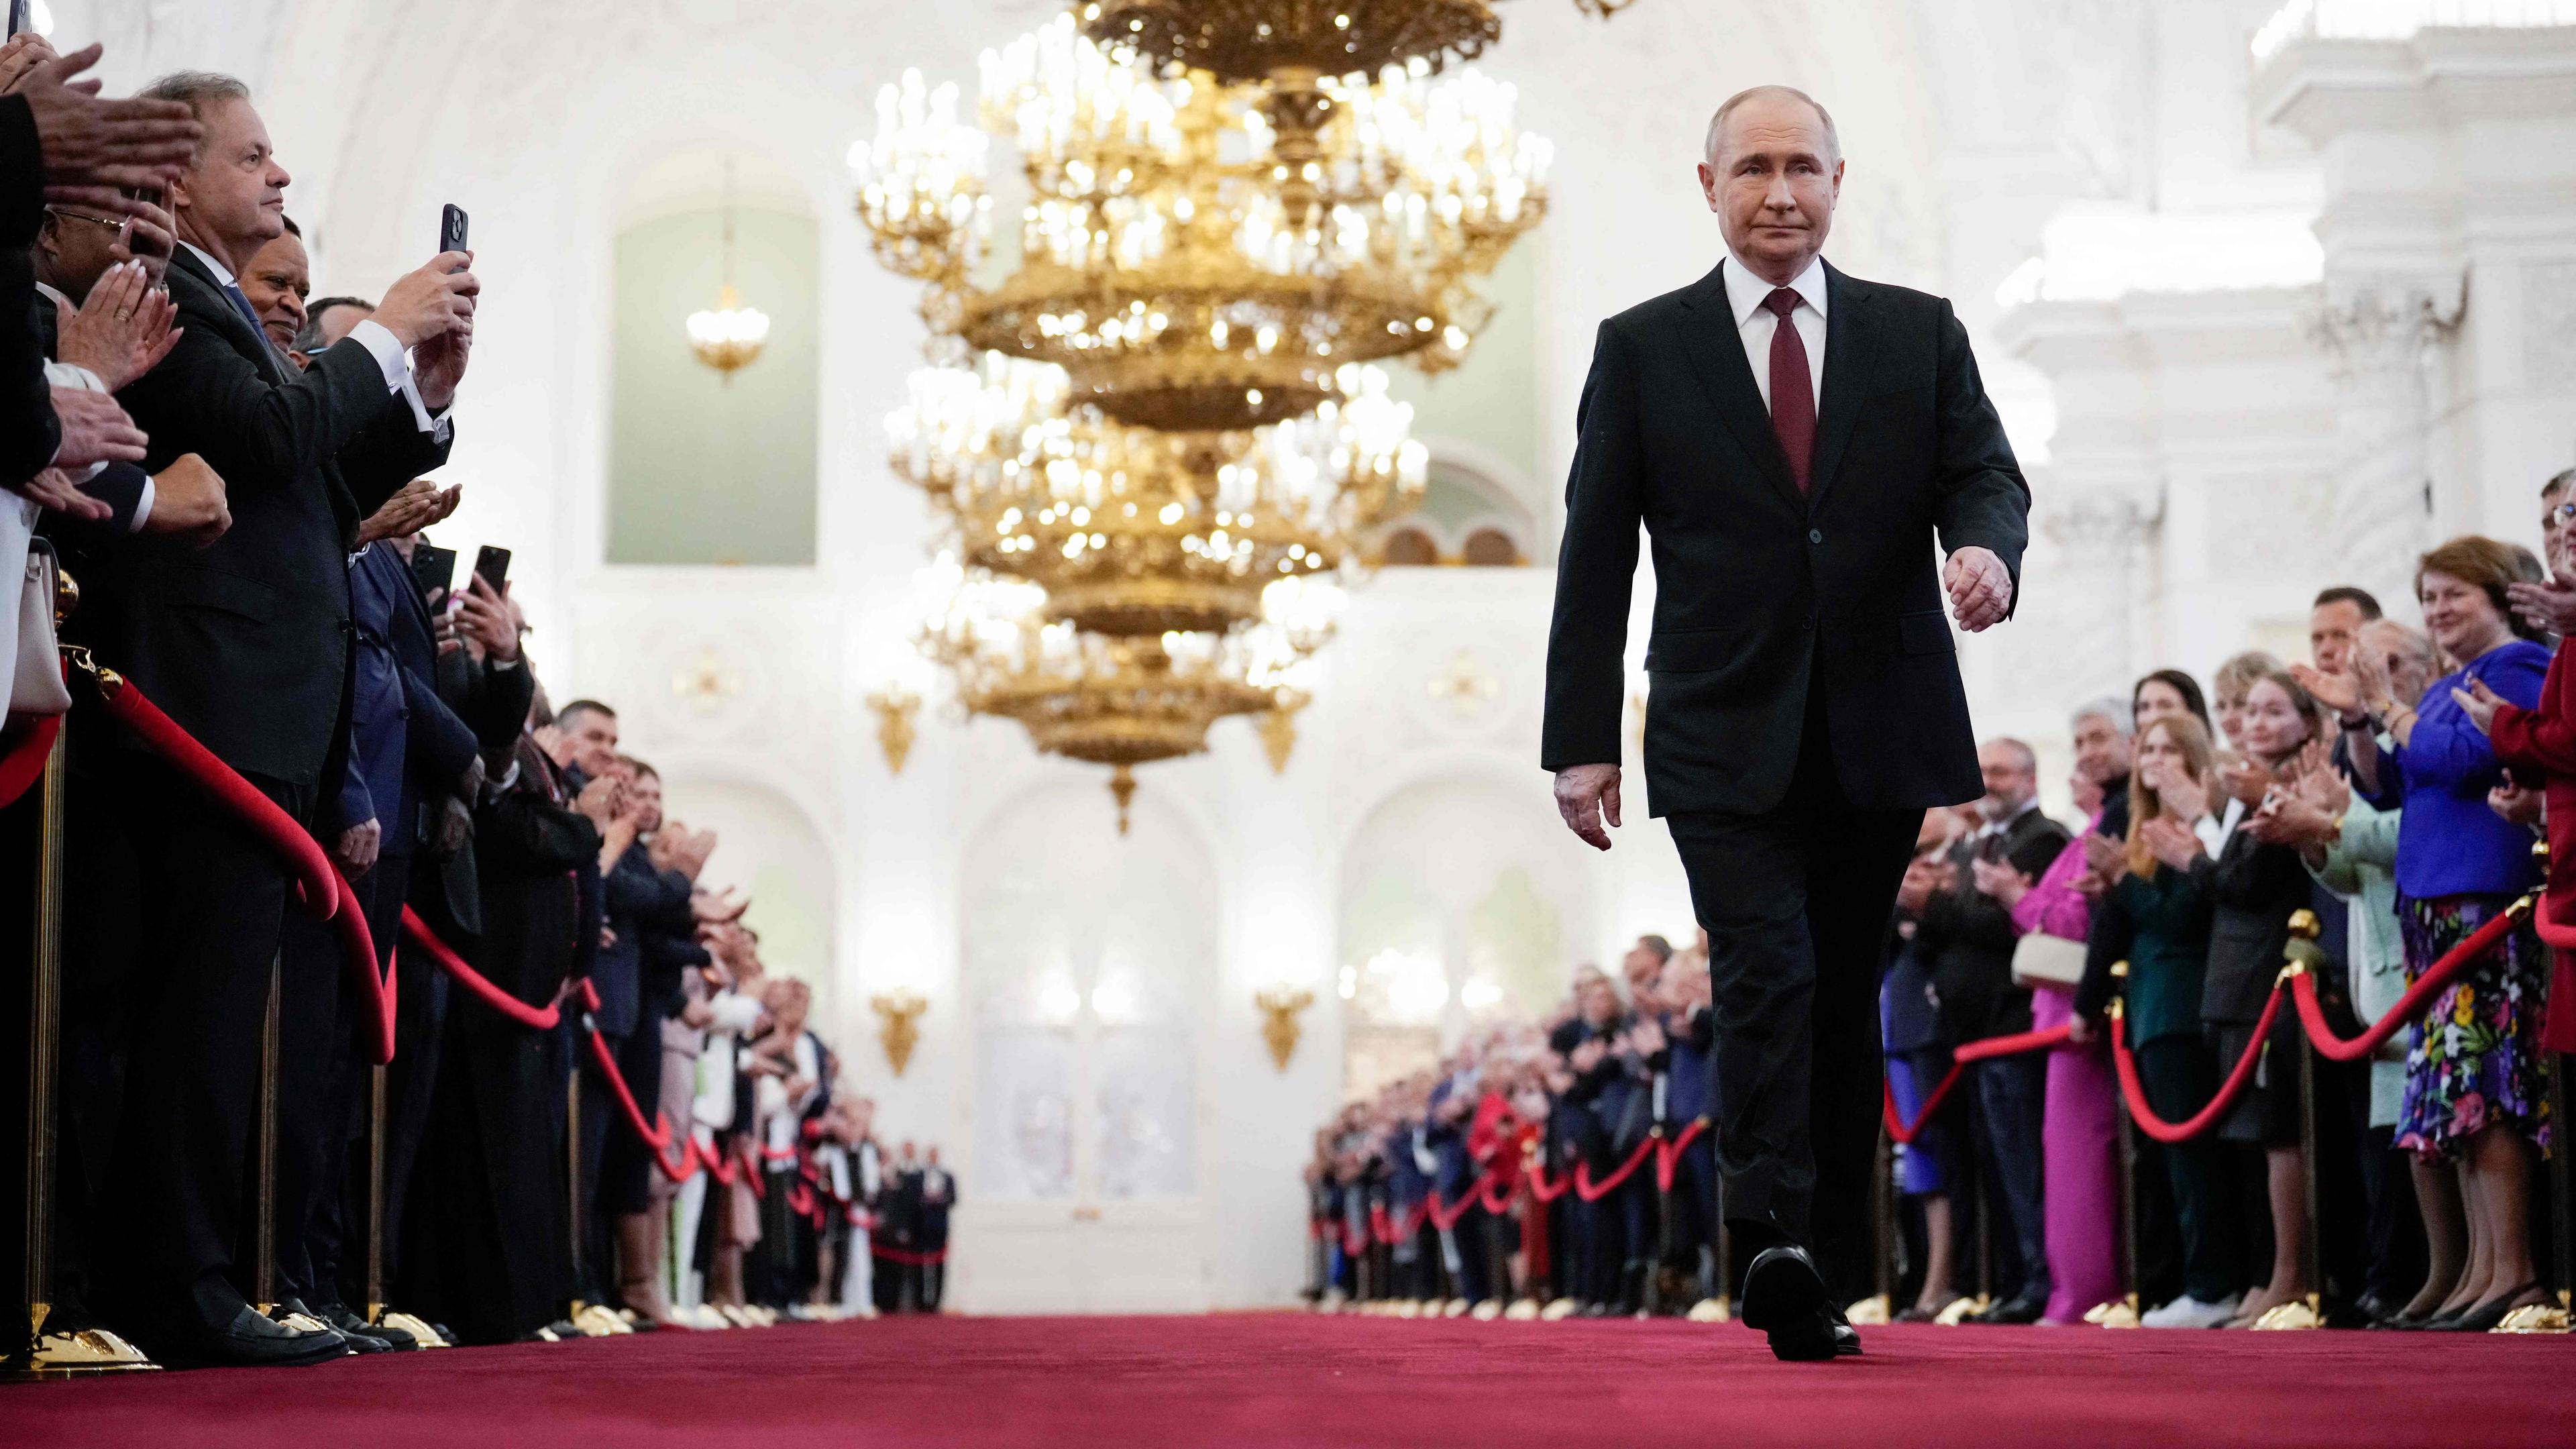 Russian president-elect Vladimir Putin walks prior to his inauguration ceremony at the Kremlin in Moscow on May 7, 2024. (Photo by Alexander Zemlianichenko / POOL / AFP)